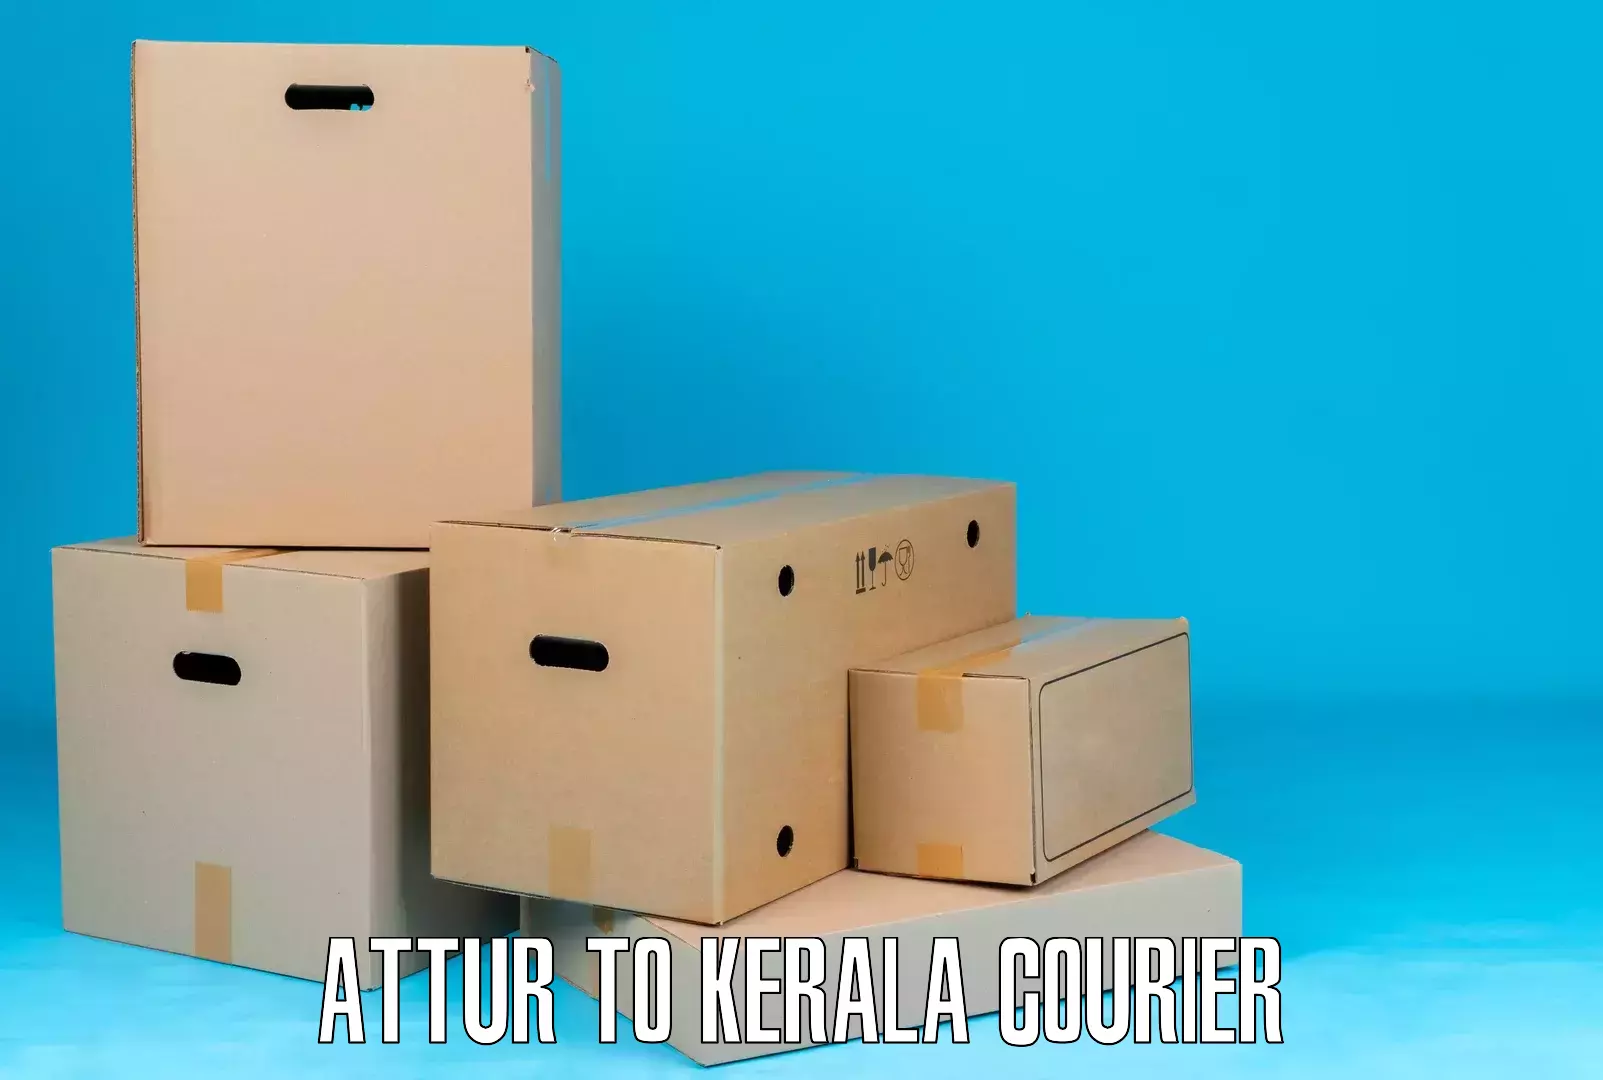 Weekend courier service Attur to Kerala